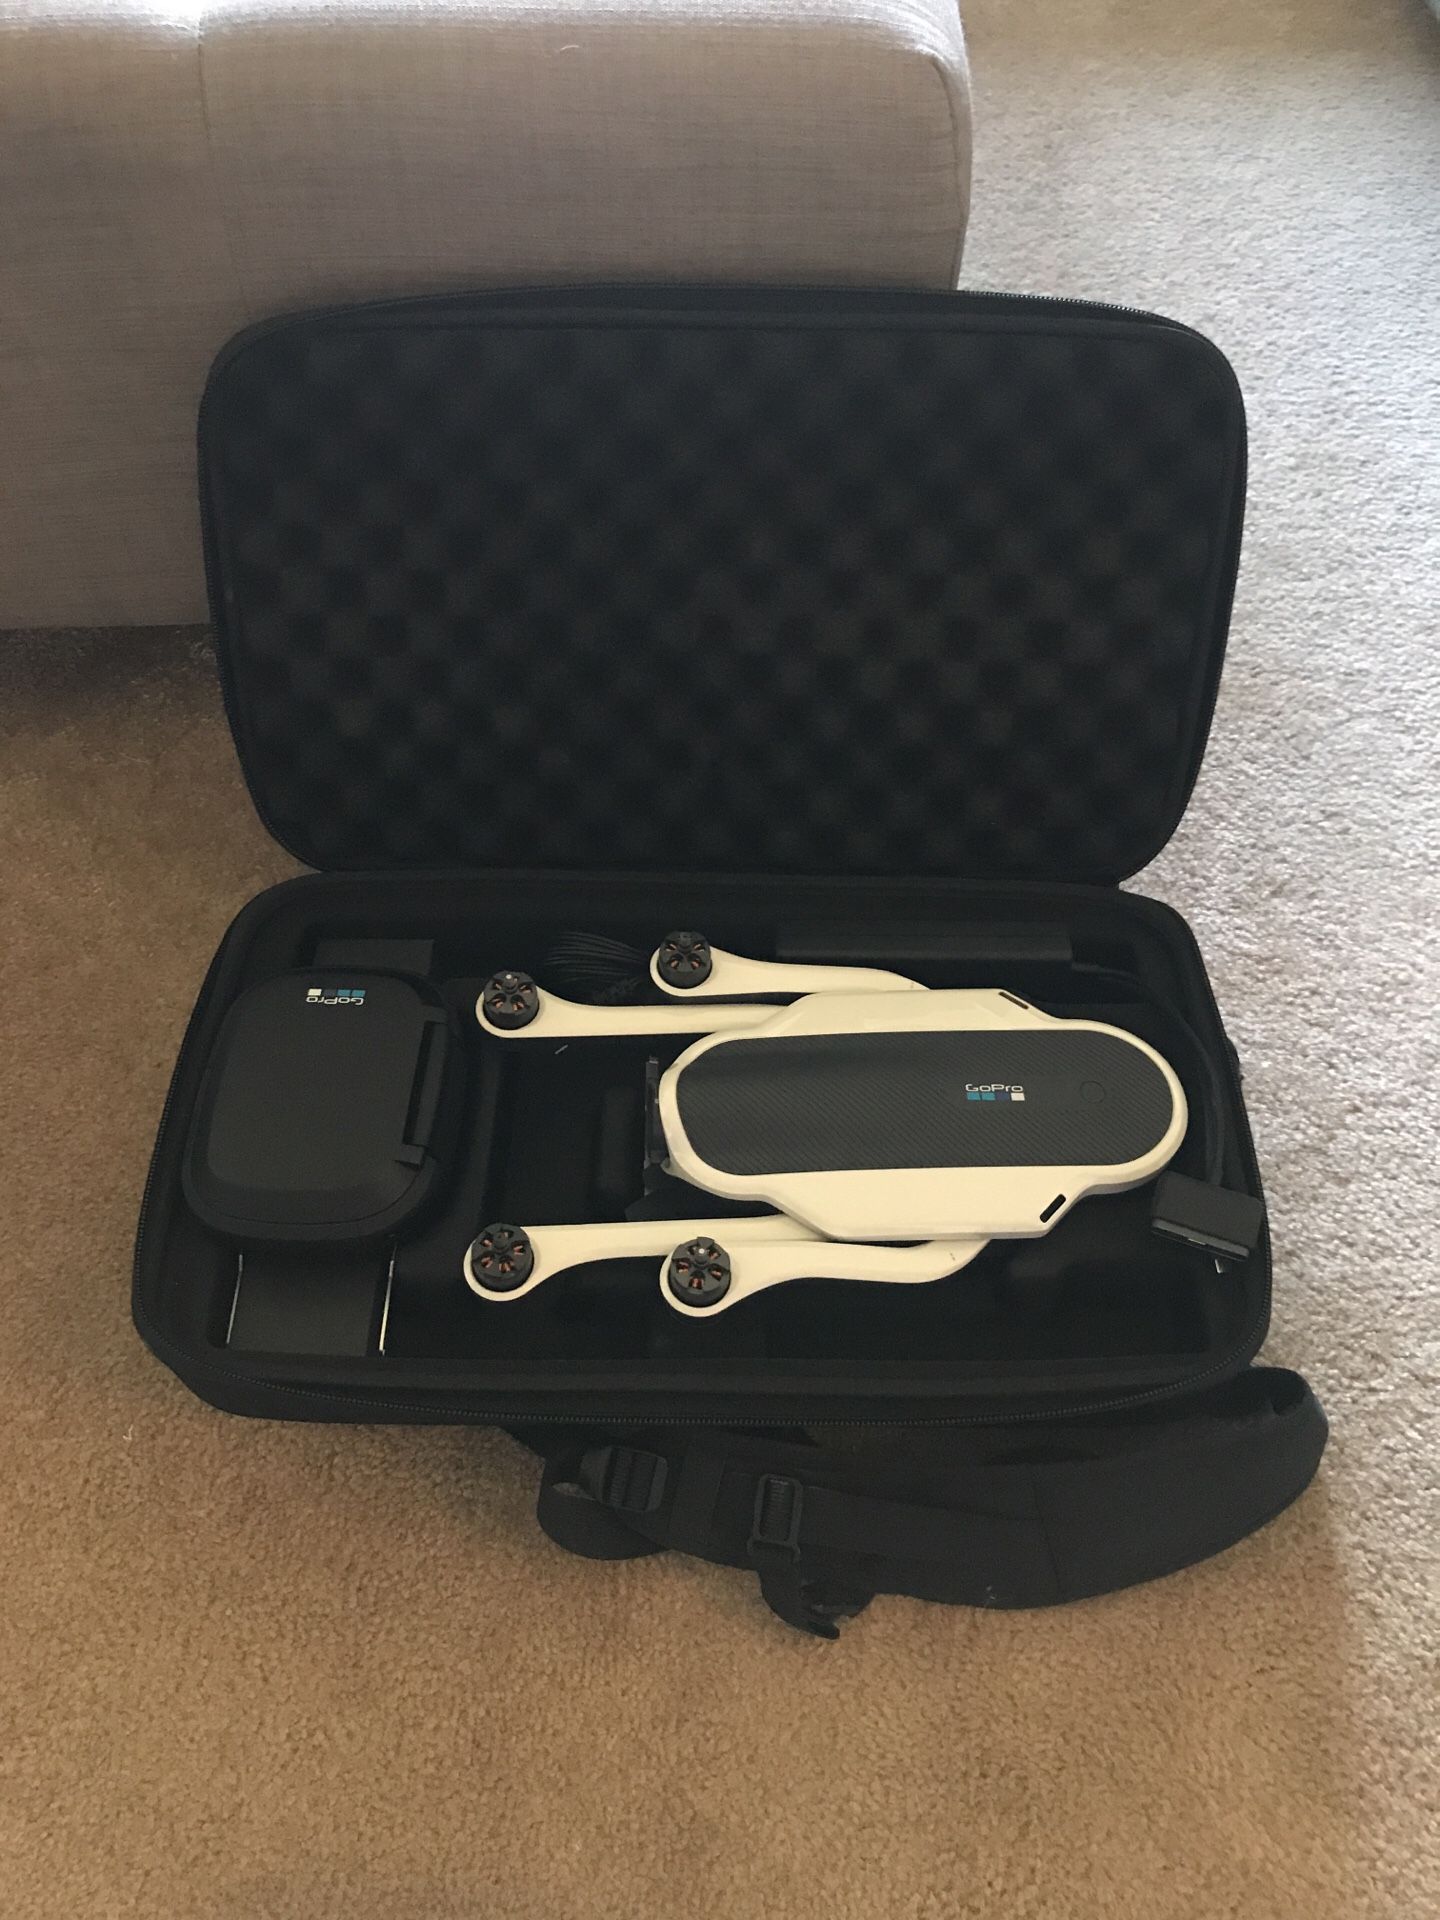 GoPro Karma remote and parts